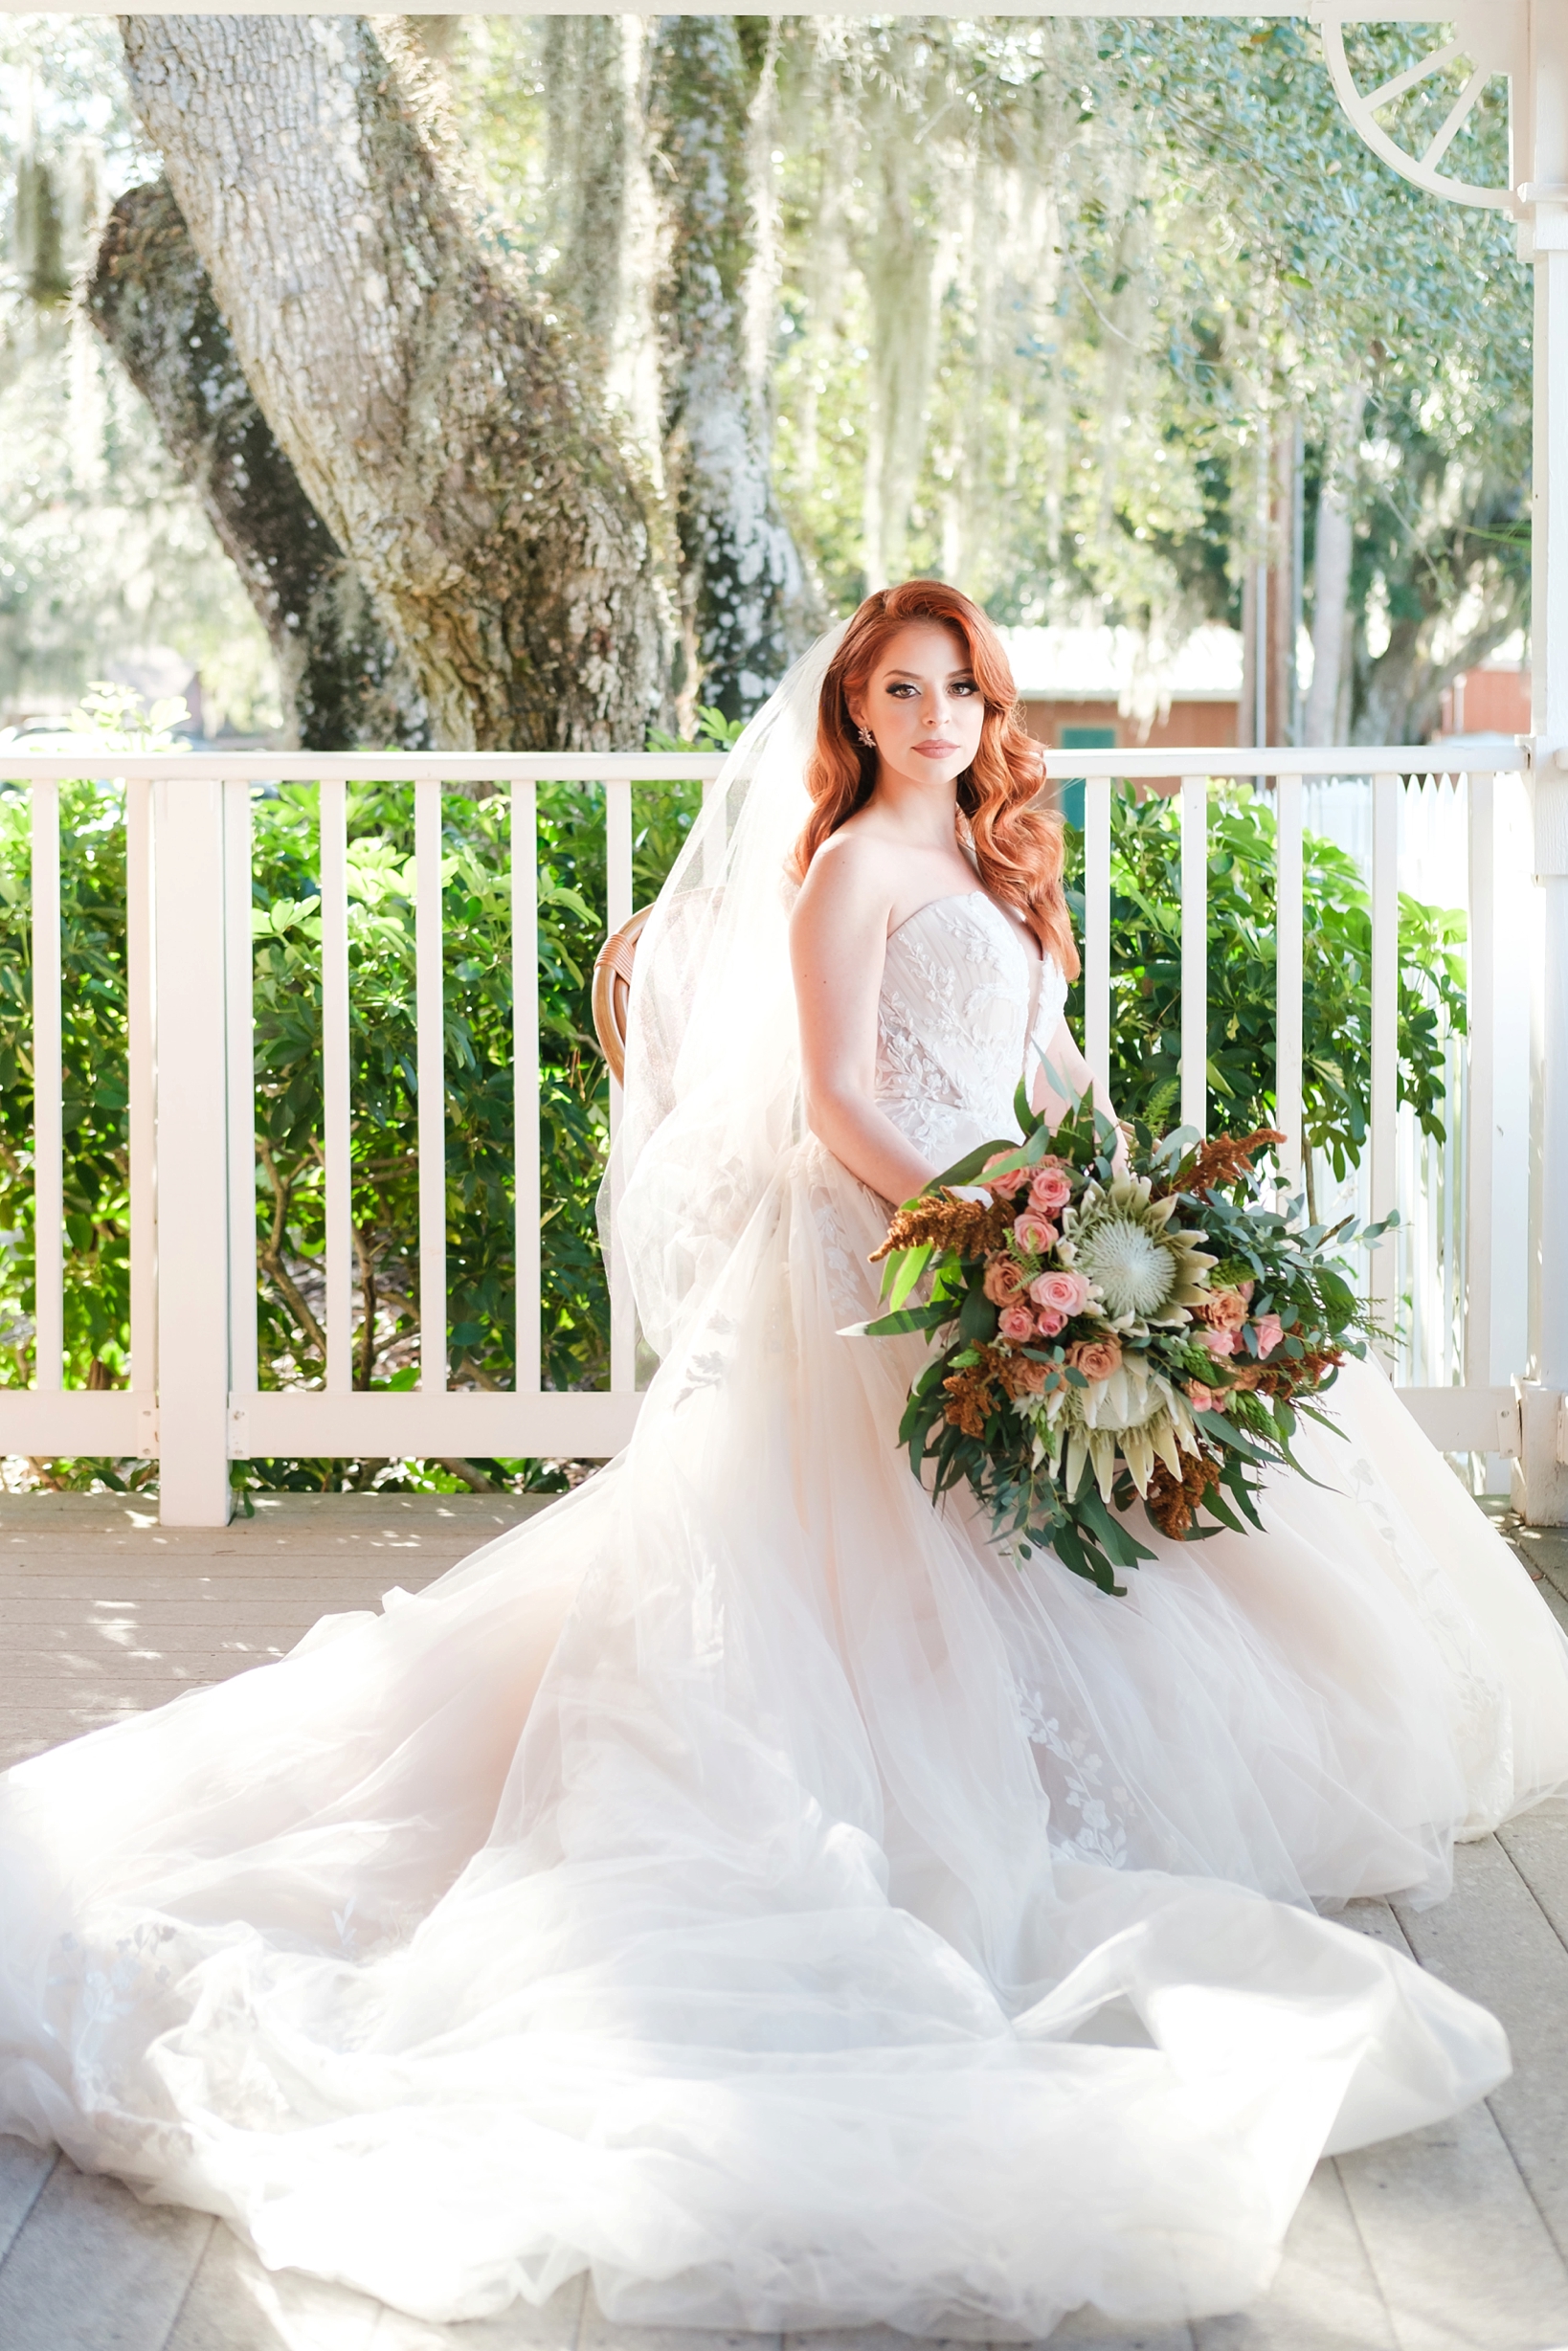 Stunning portrait of the Bride holding her floral boutique